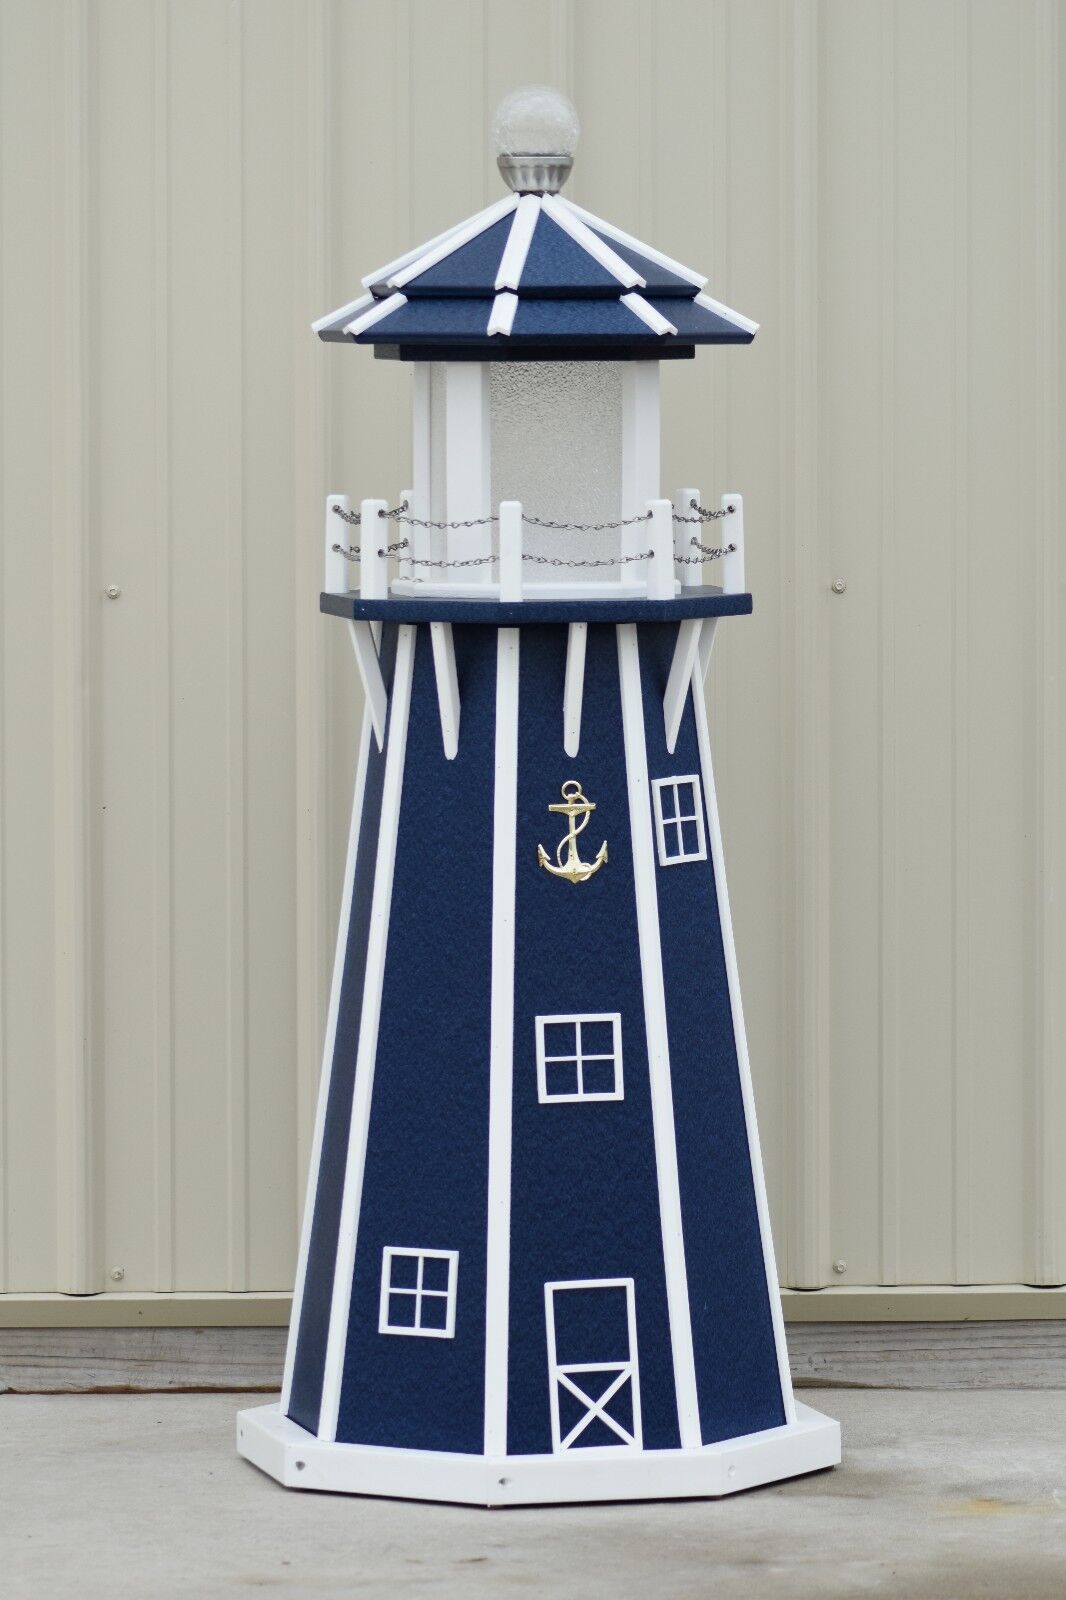 4 Foot Electric and Solar Powered Poly Lighthouse (Patriot Blue/white trim)